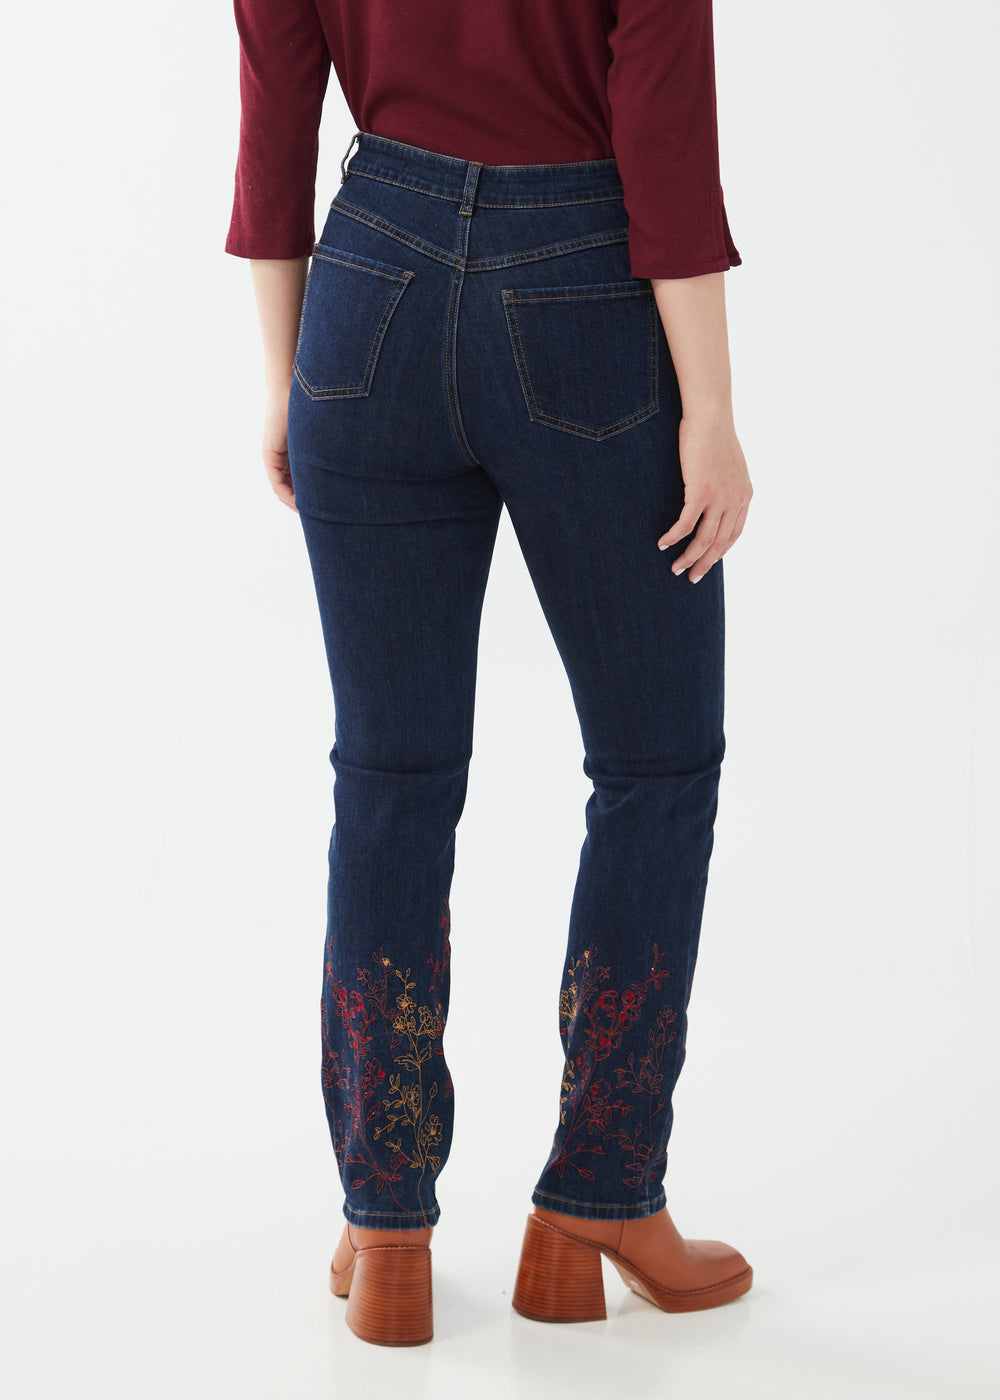 FDJ Suzanne straight jeans 6906779, embroidered